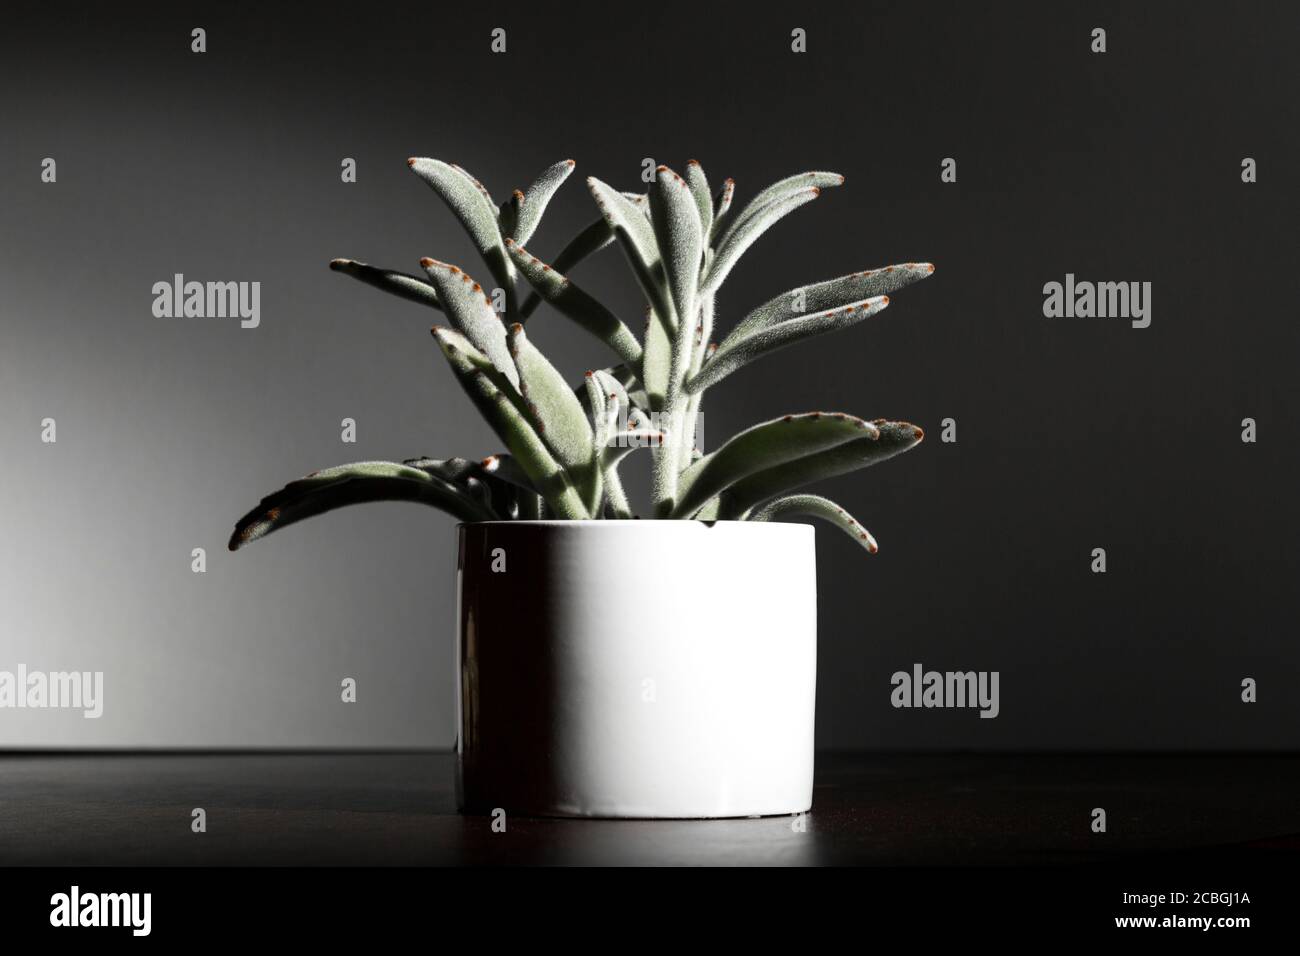 A succulent: Panda plant or Kalanchoe tomentosa in a cylindrical white pot on a dark grey background. Stock Photo